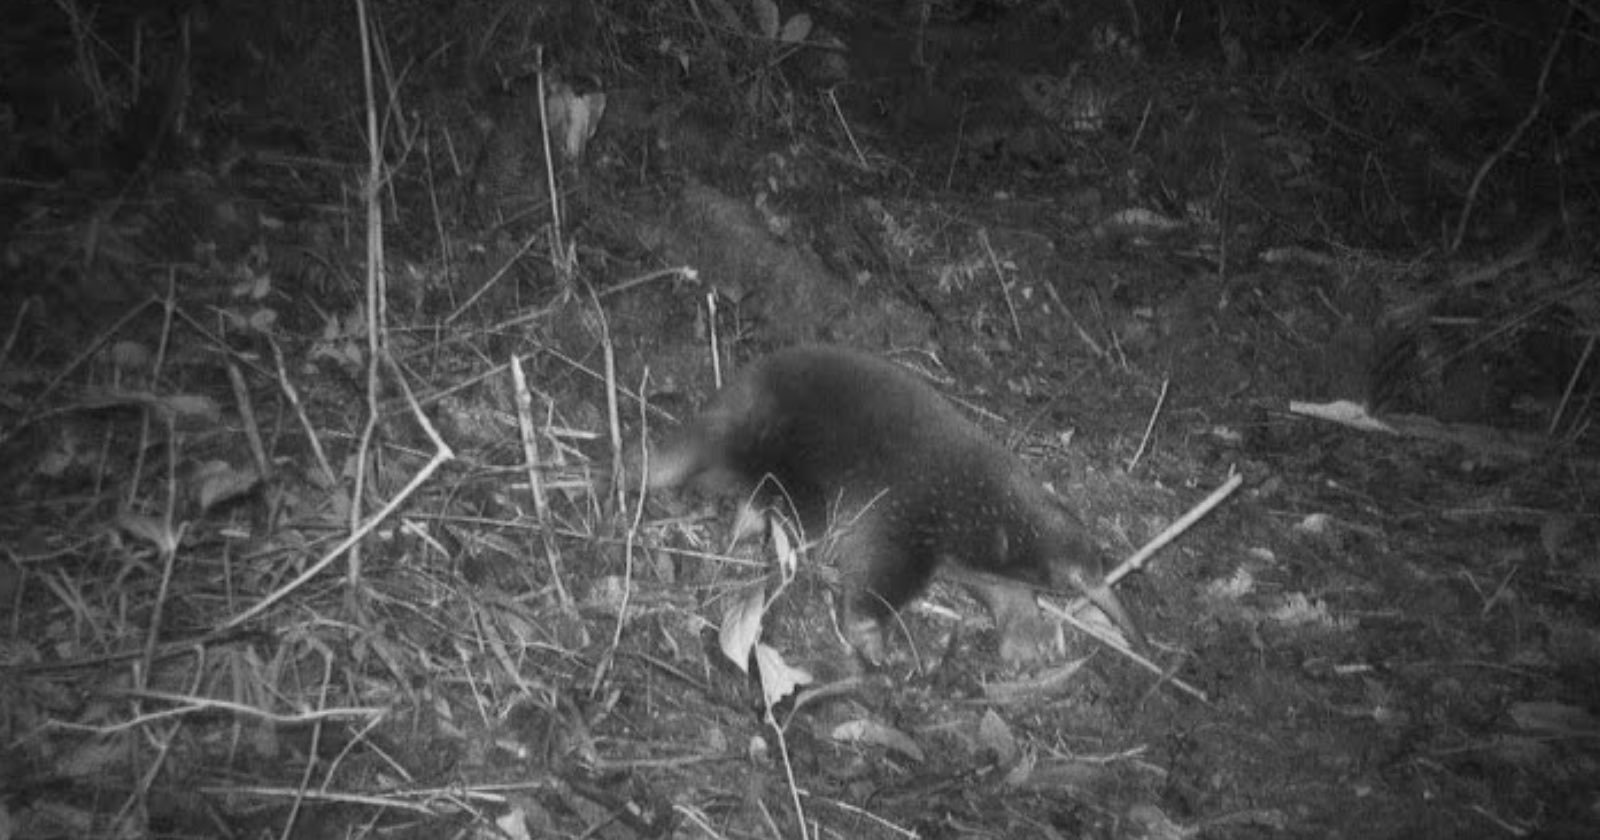 Egg-Laying Mammal Thought to be Extinct Rediscovered on Trail Camera